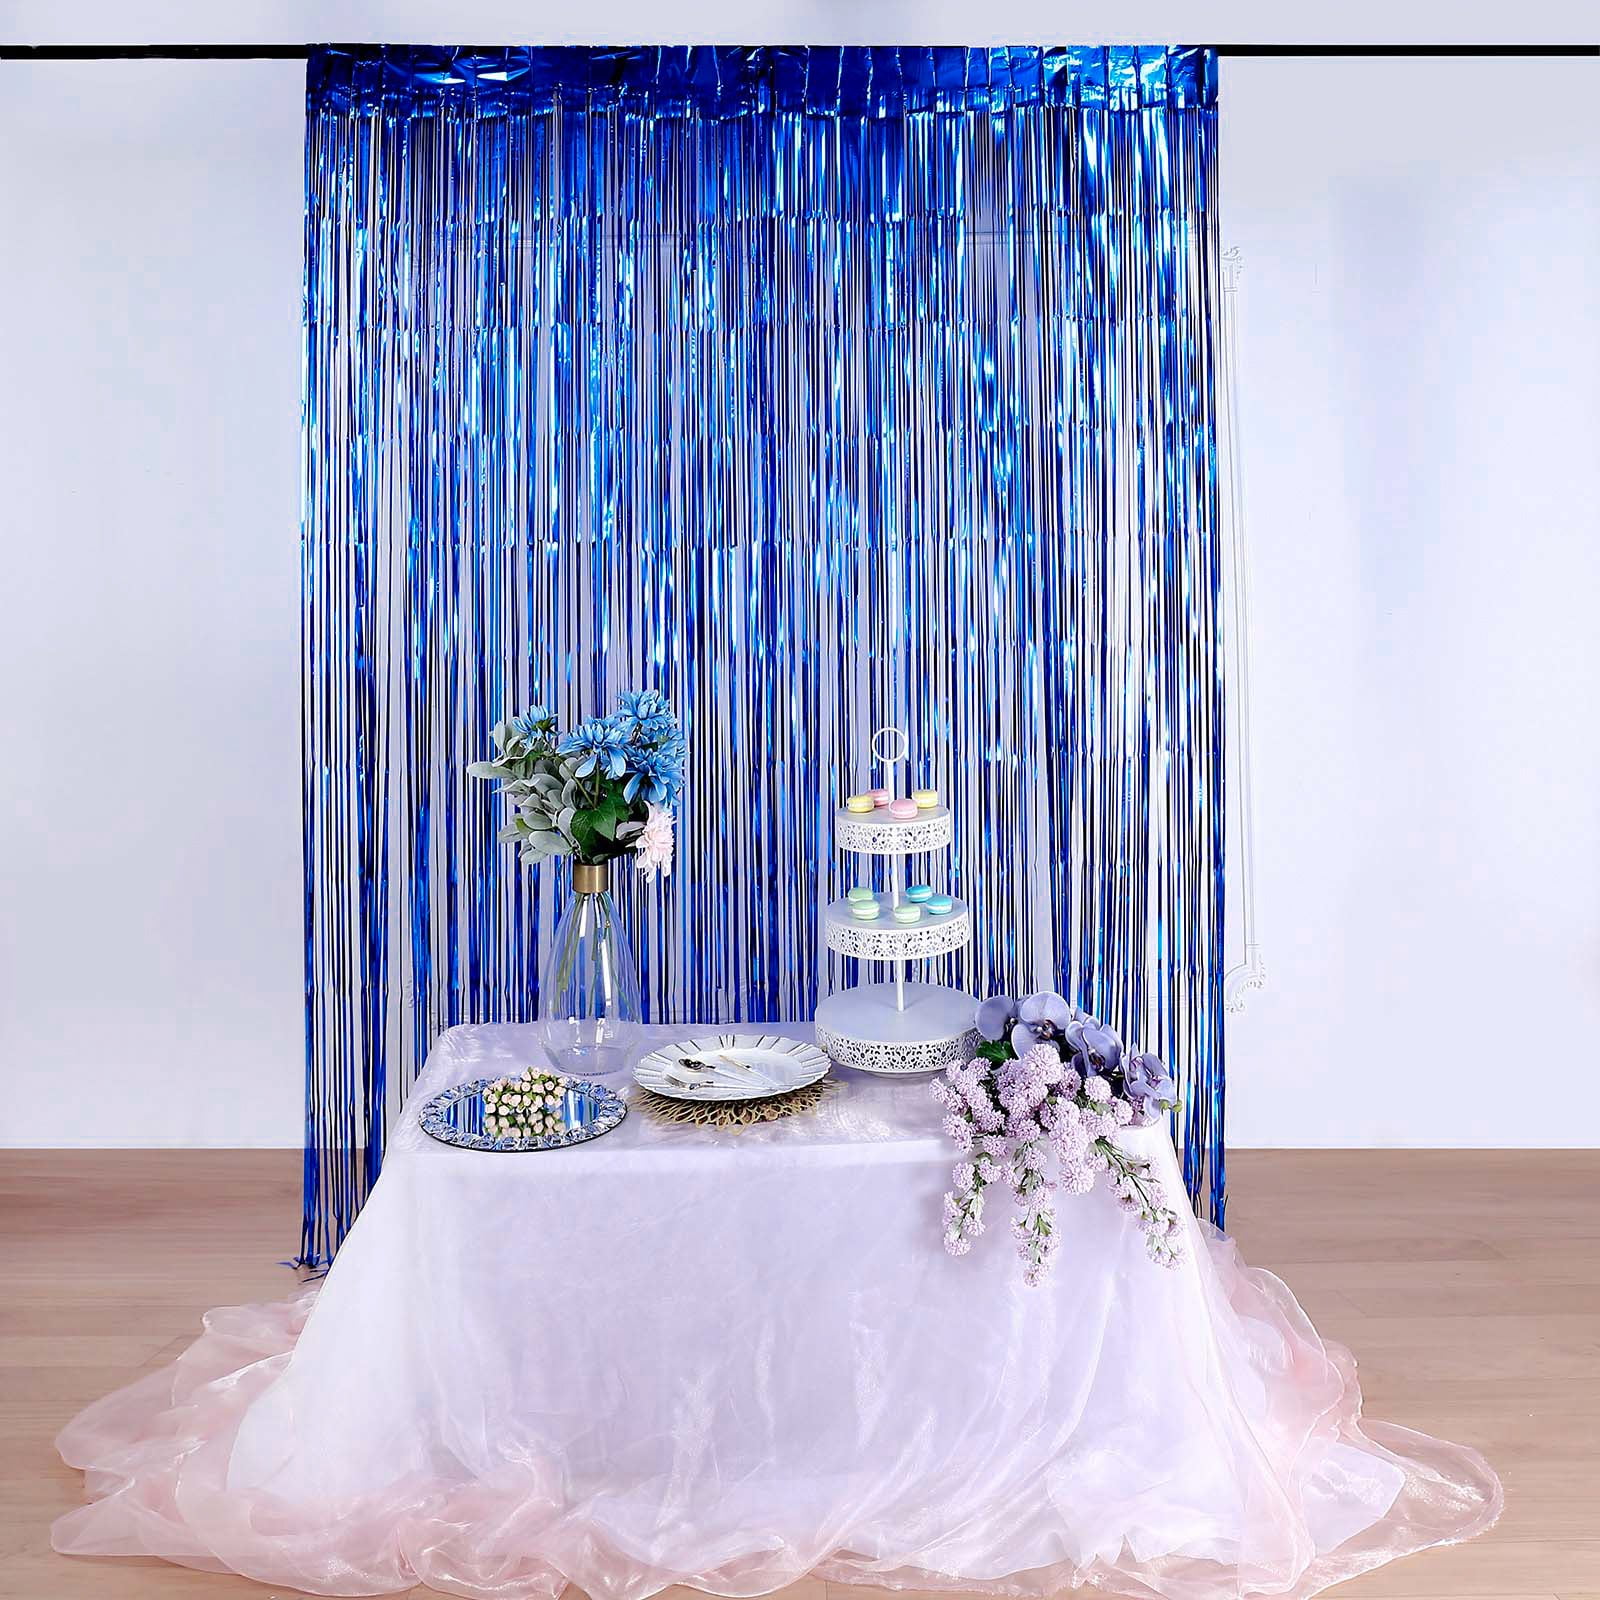 Efavormart 8ft Royal Blue Metallic Foil Fringe Curtain - Doorway and Party  Backdrop Curtain for Wedding, Banquet Halls, Party, Restaurants, Photo  Booth Decorations 